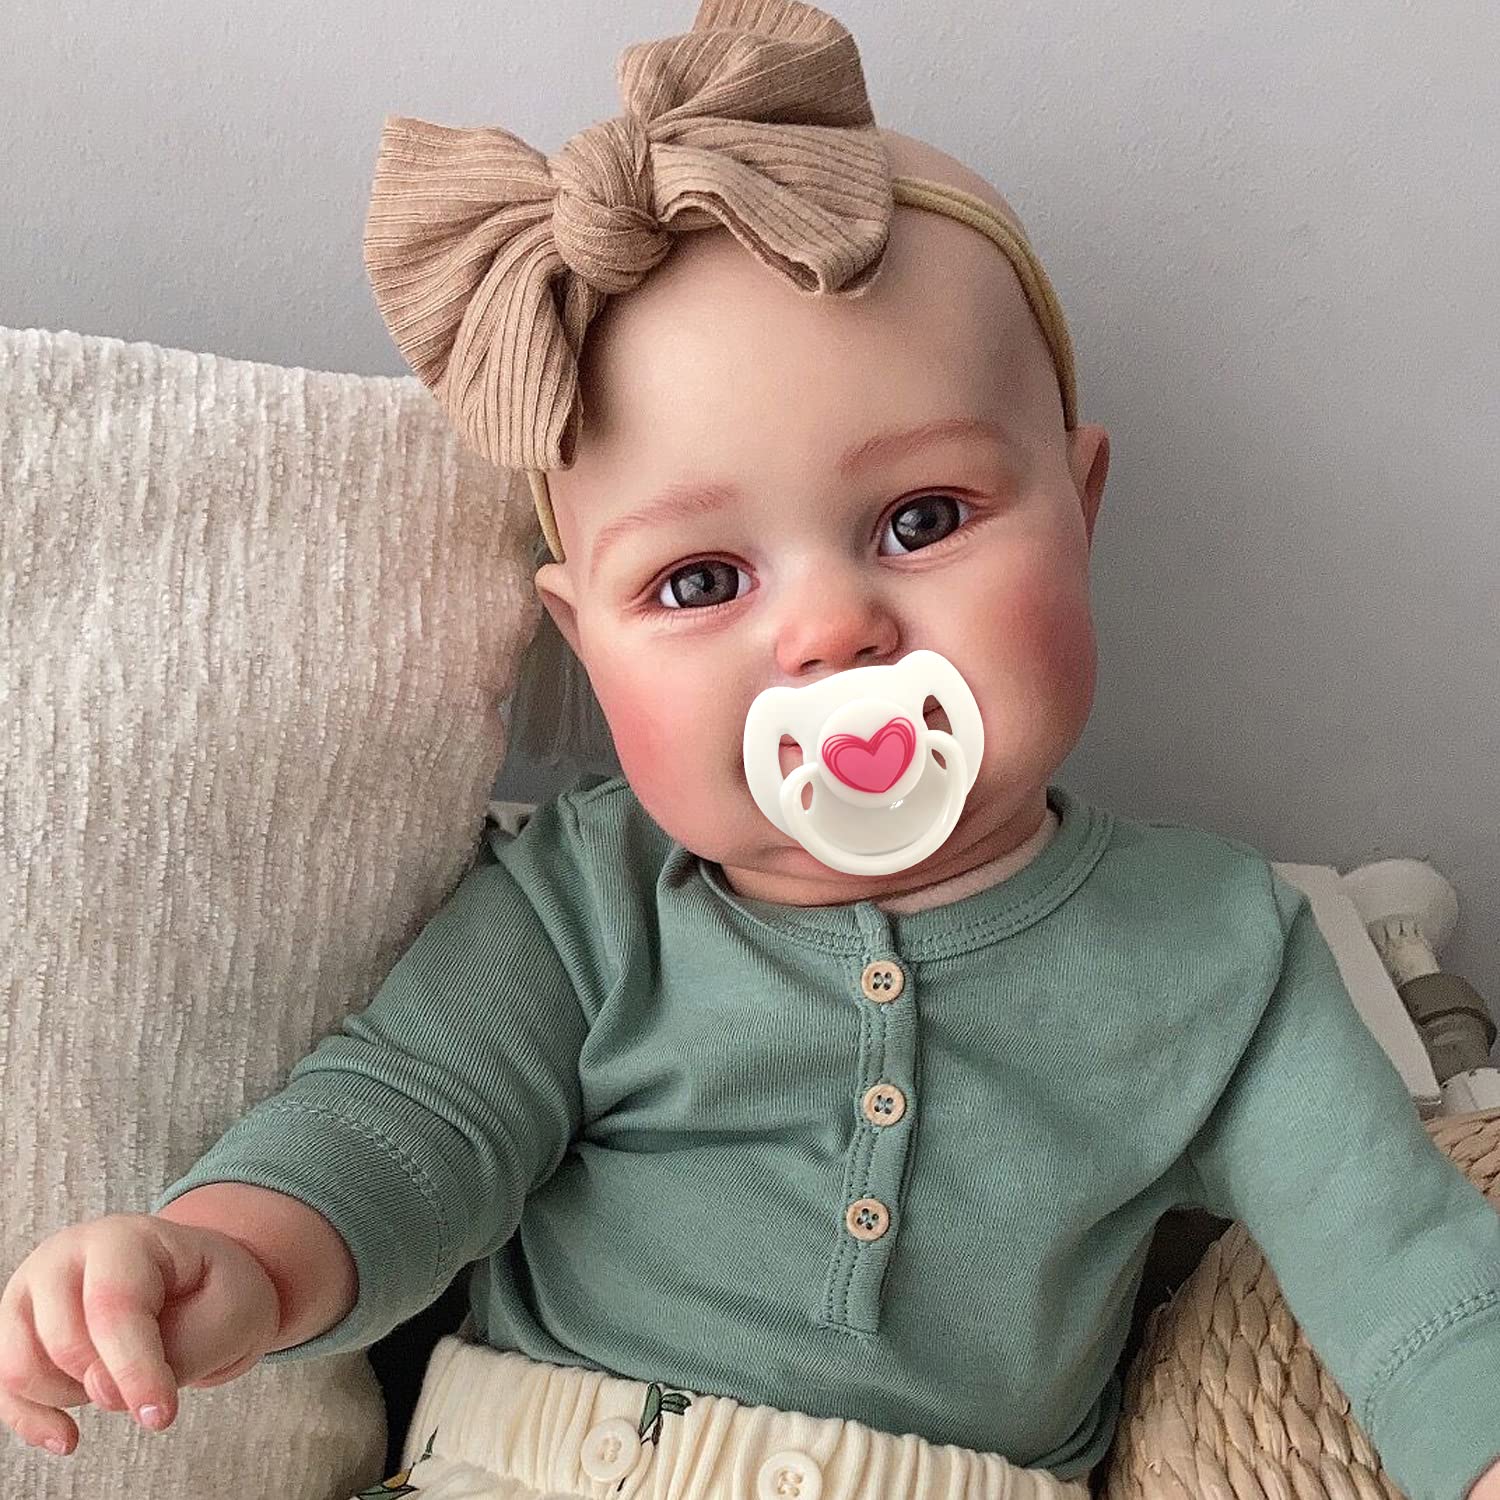 Anano Reborn Baby Doll Newborn 24 Inches Silicone Reborn Toddler Doll Hand Drawn Veins Baby Doll Real Life Size Baby Doll Toy for Age 3+ Birthday Gift Therapy for Dementia Patient